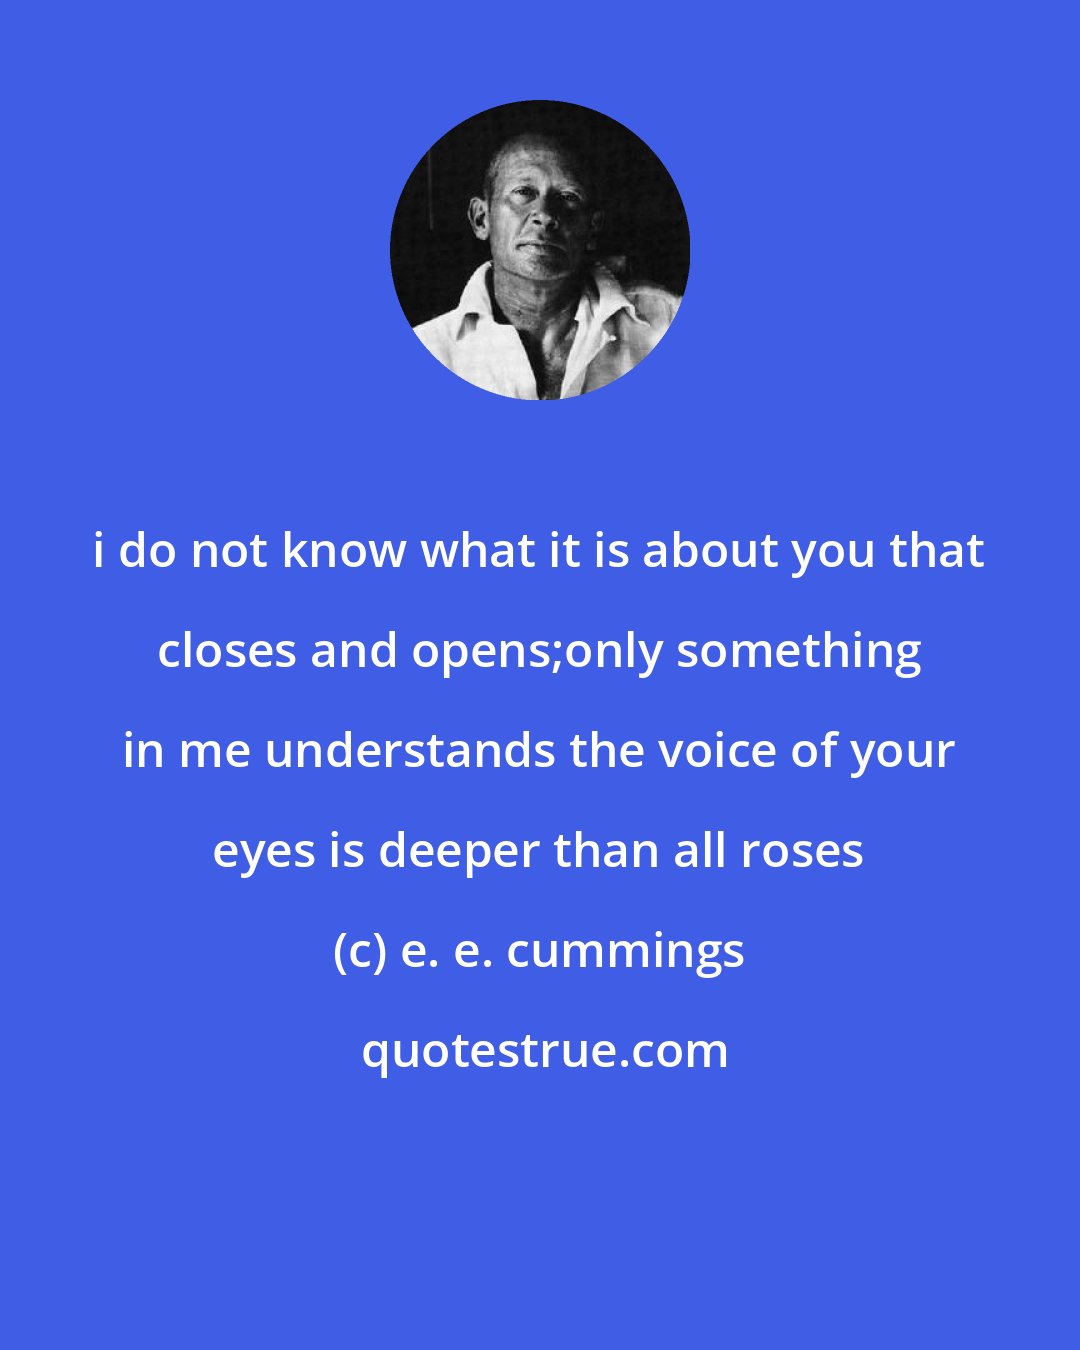 e. e. cummings: i do not know what it is about you that closes and opens;only something in me understands the voice of your eyes is deeper than all roses